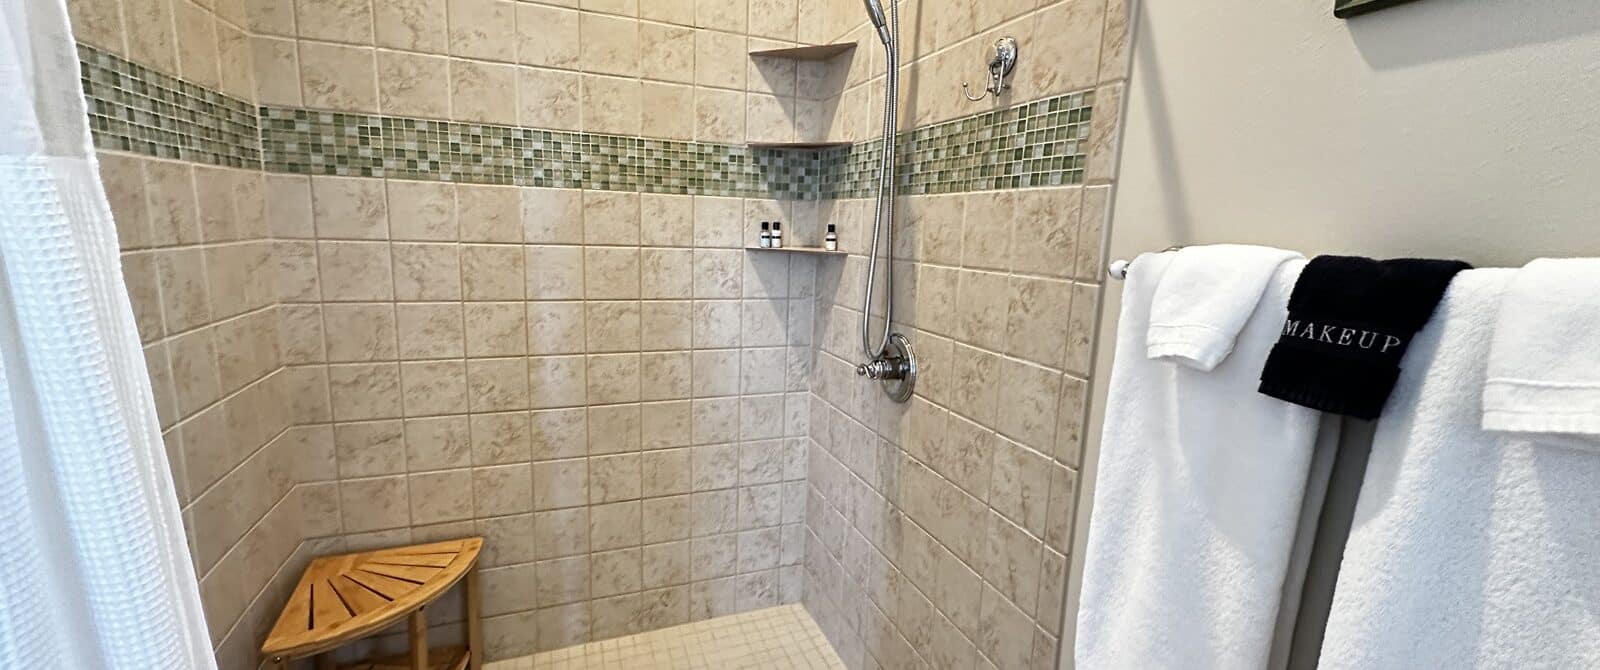 Walk-in shower with towels, shelves, bench, shampoo and conditioner